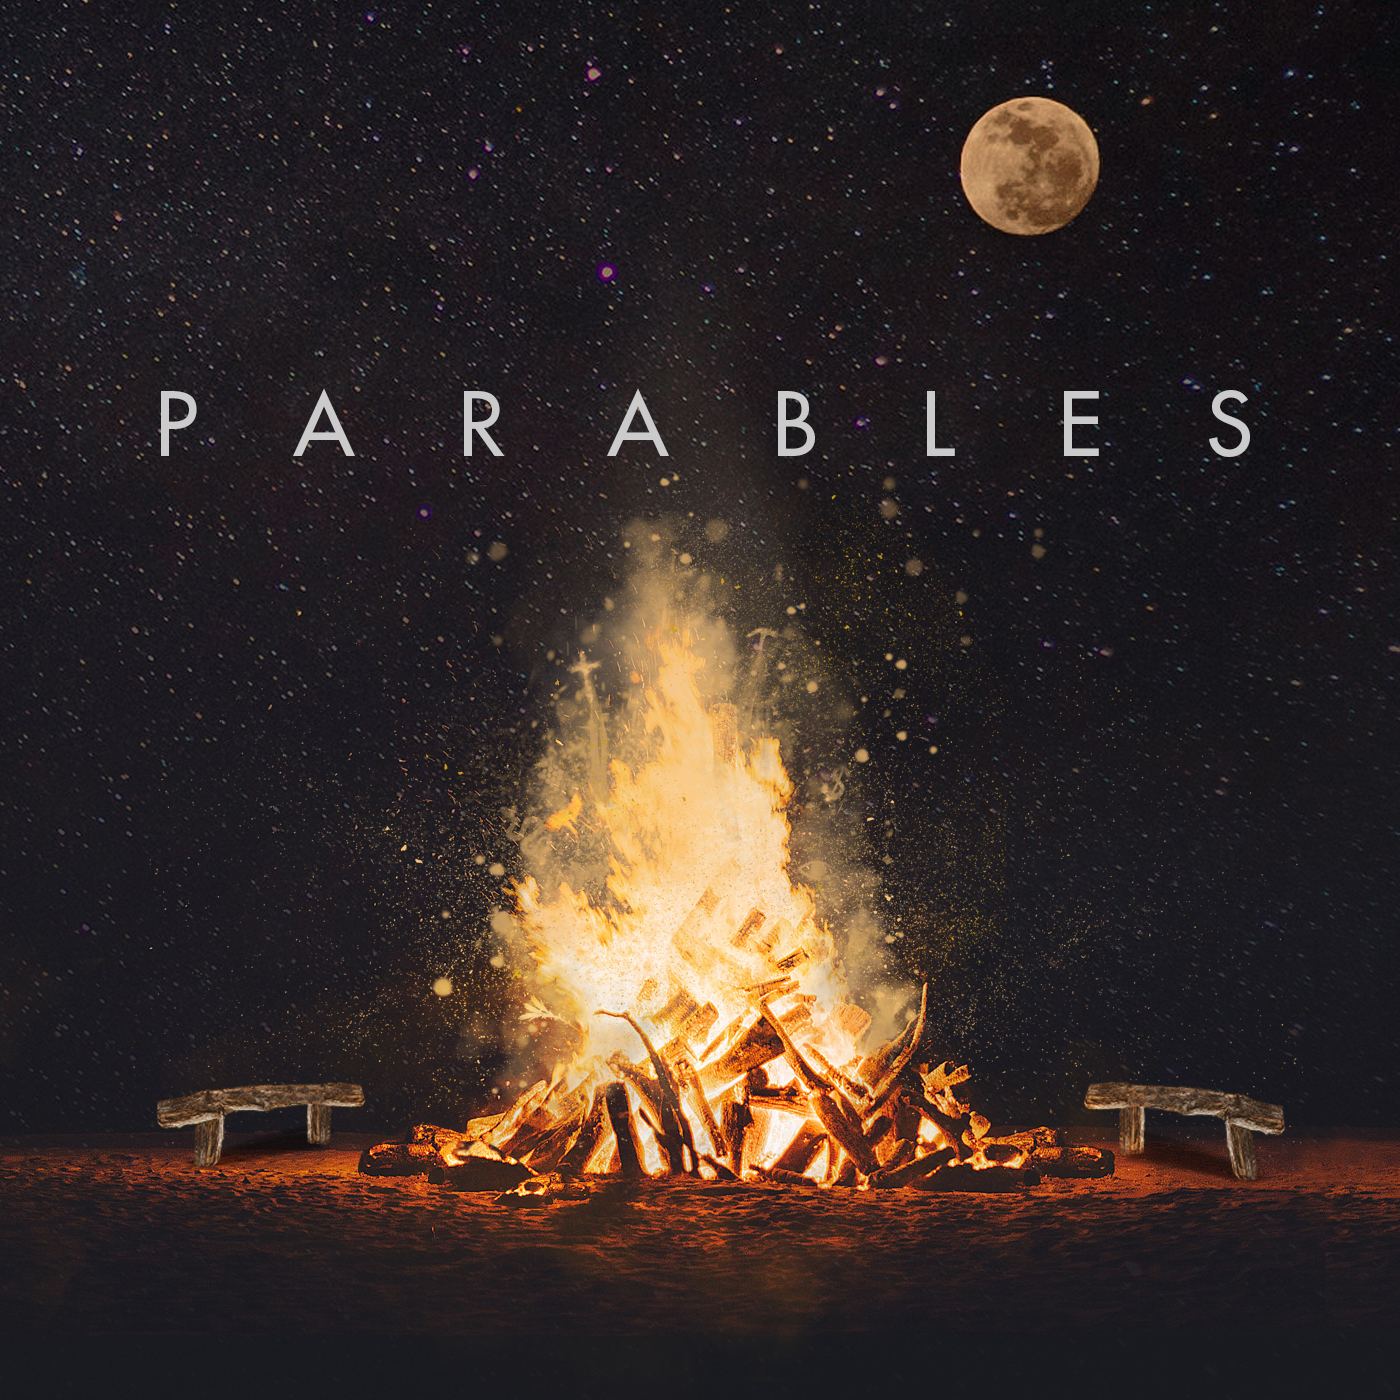 Parables - The Barren Fig Tree - Chris Wall - 9-8-2019